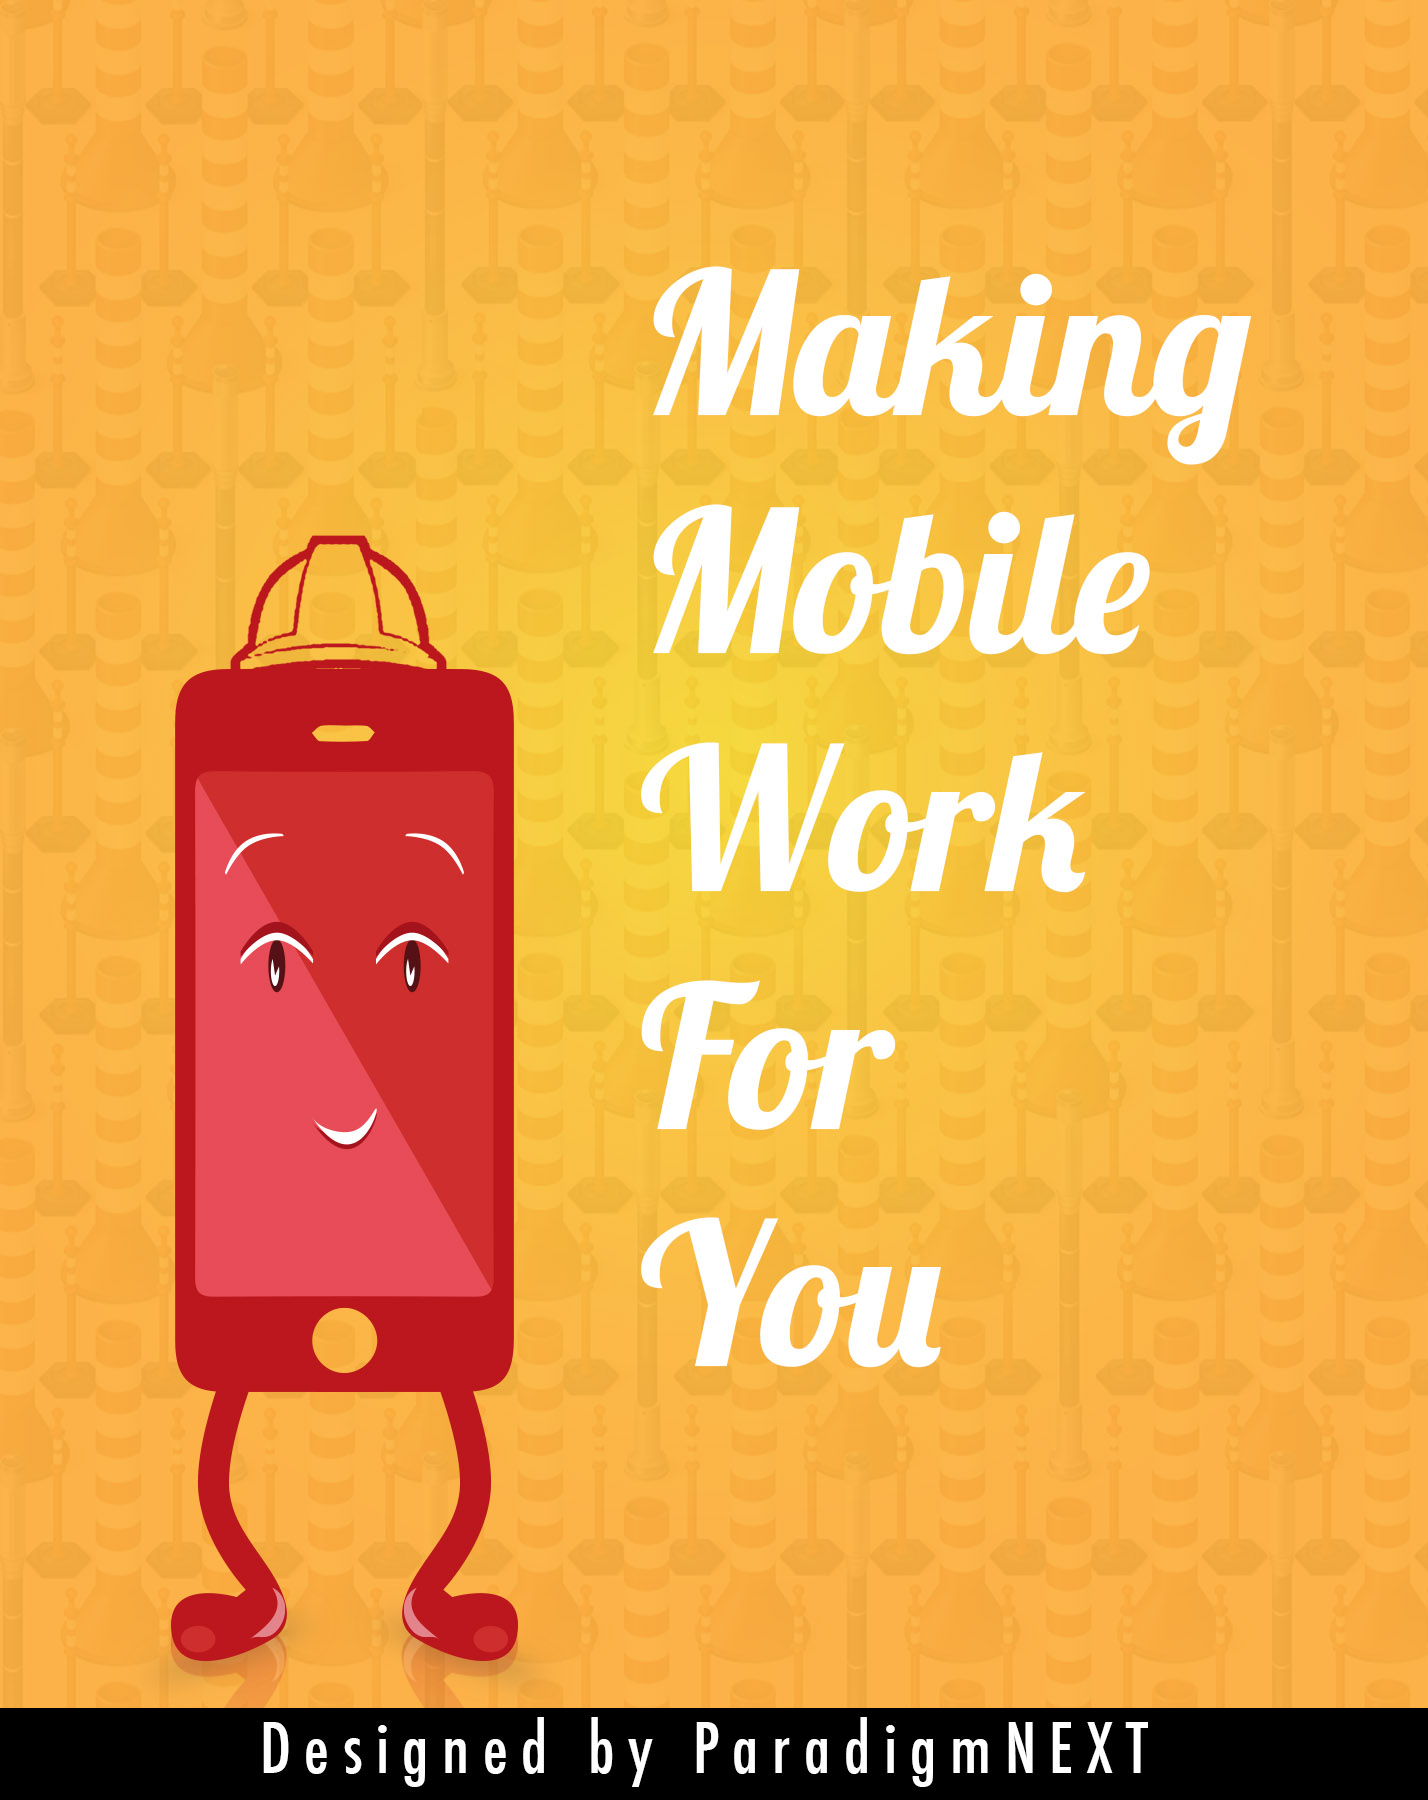 ParadigmNEXT: Making Mobile Marketing Work for You